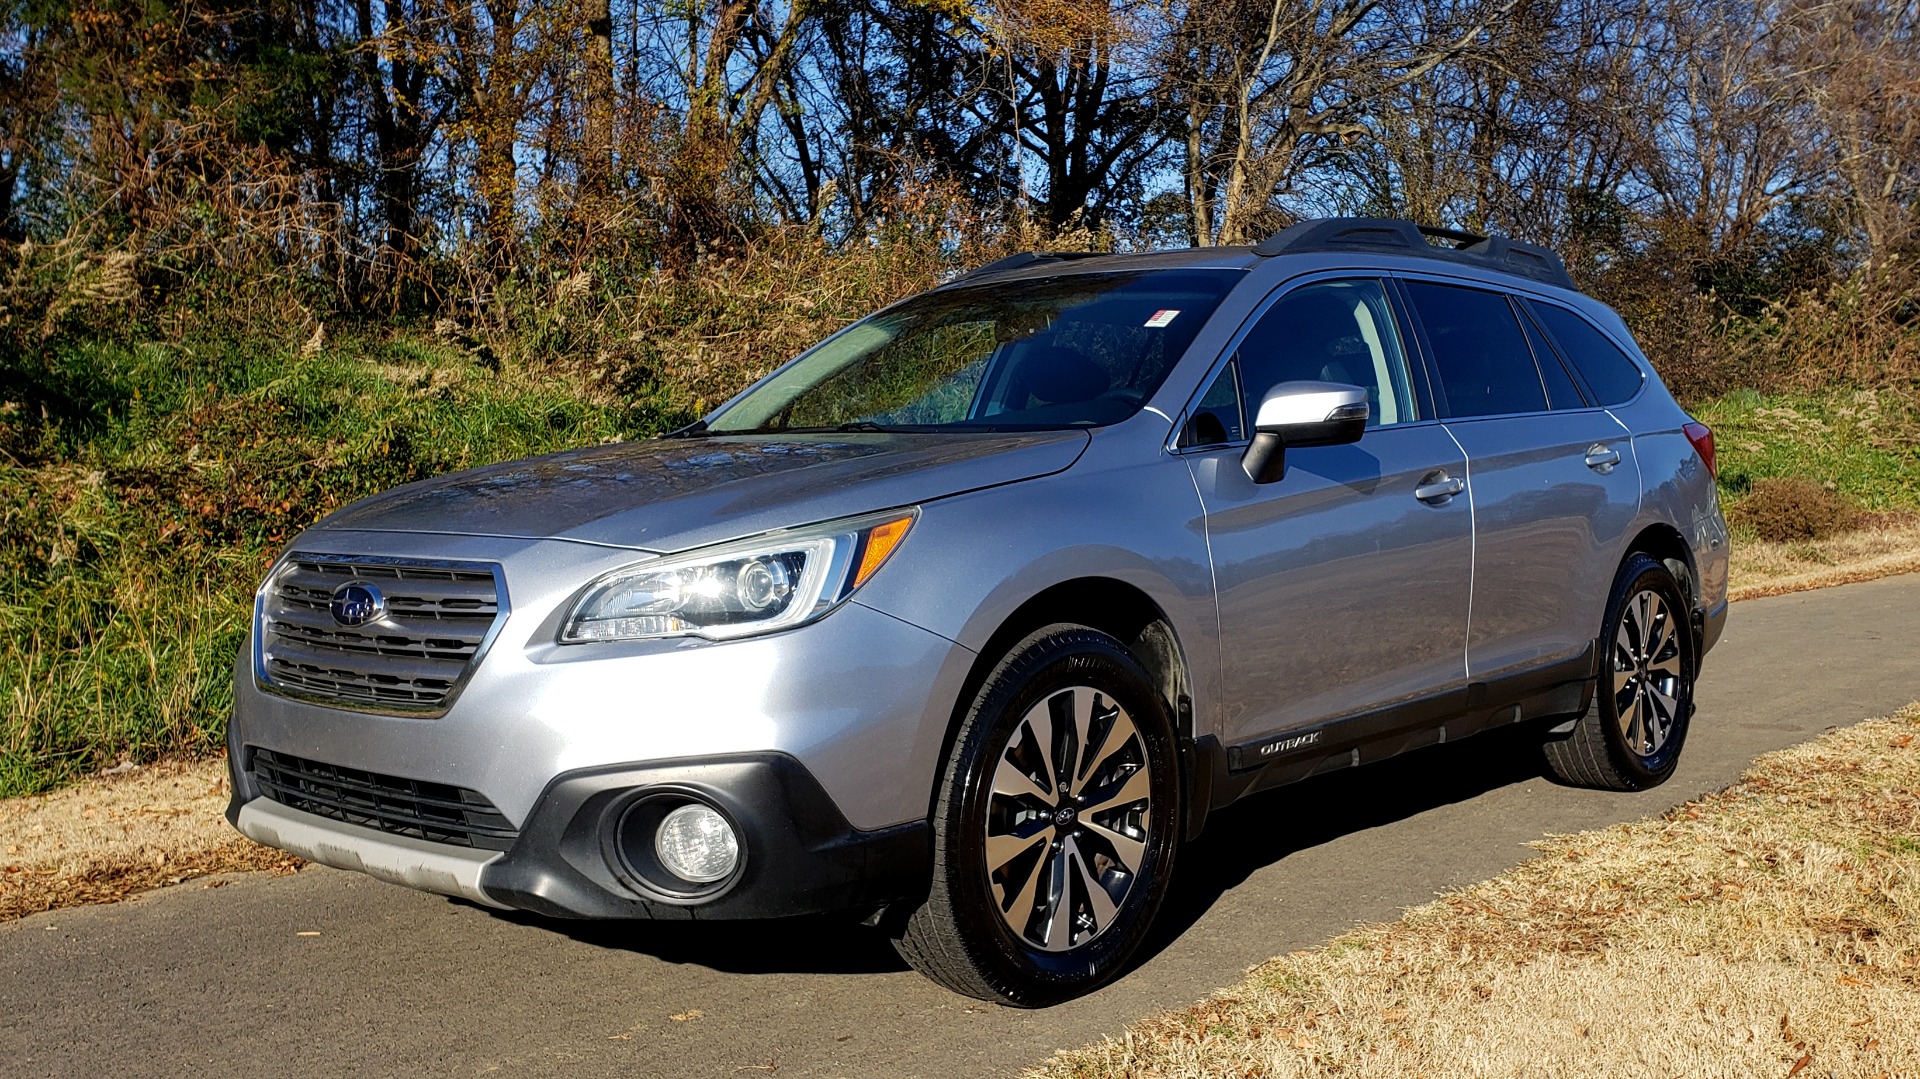 Used 2015 Subaru OUTBACK 2.5I LIMITED / AWD / 2.5L 4-CYL / AUTO / 18IN WHEELS for sale Sold at Formula Imports in Charlotte NC 28227 1